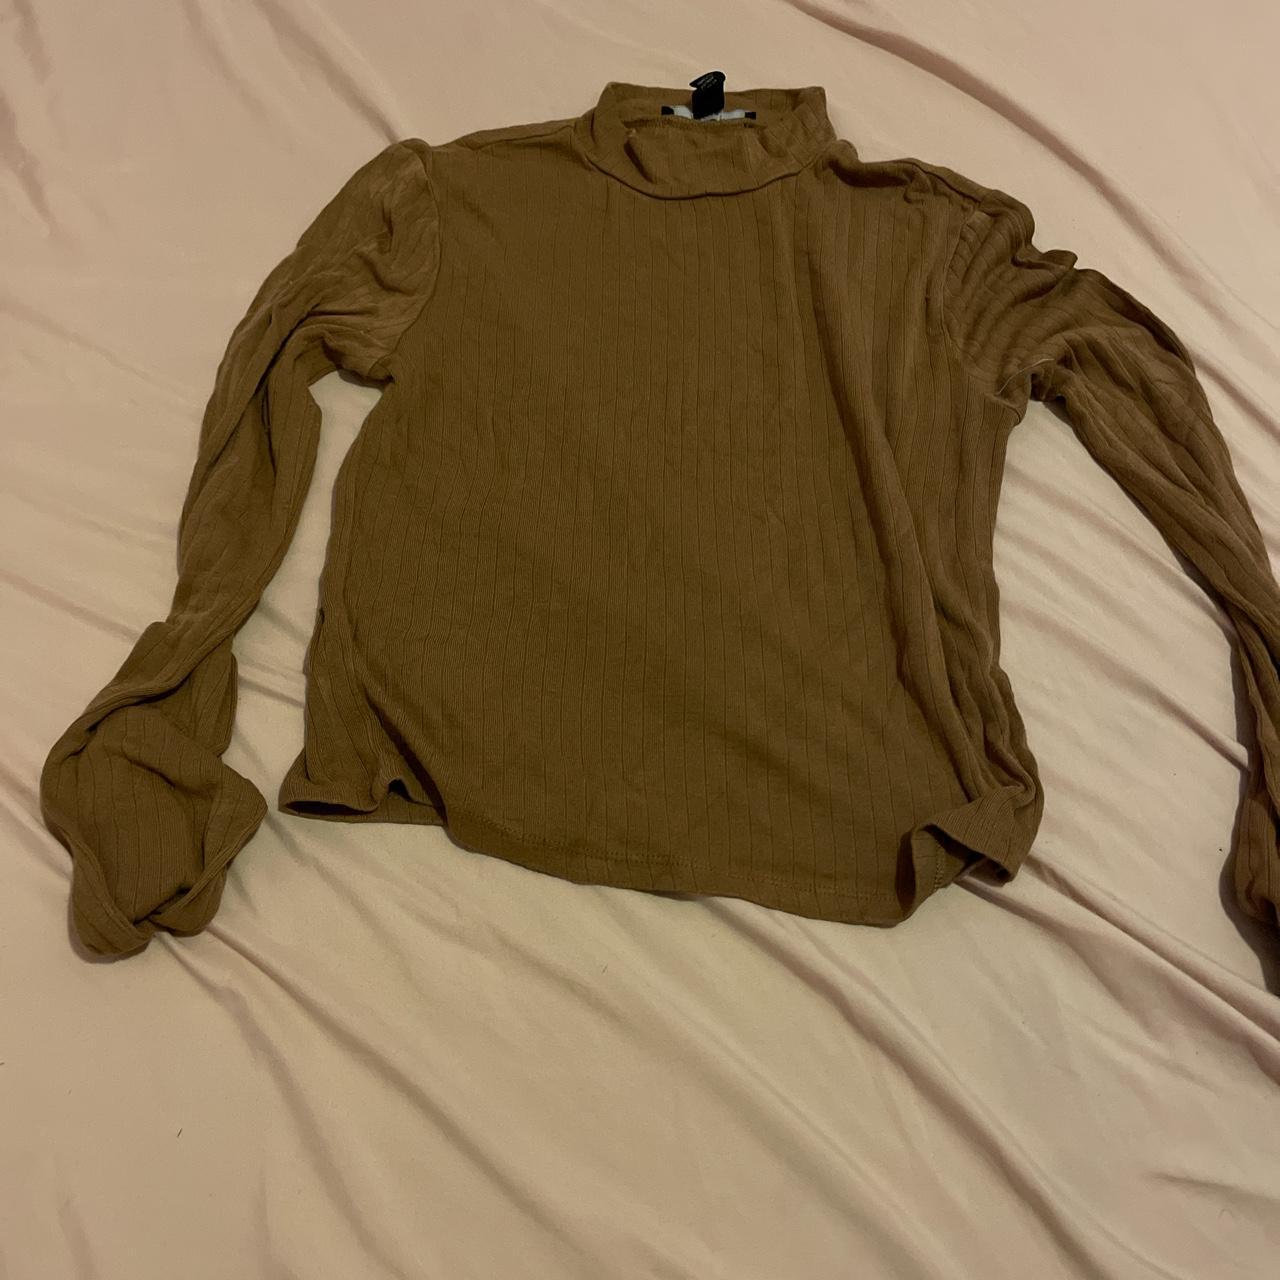 Forever 21 Women's Brown and Khaki Shirt